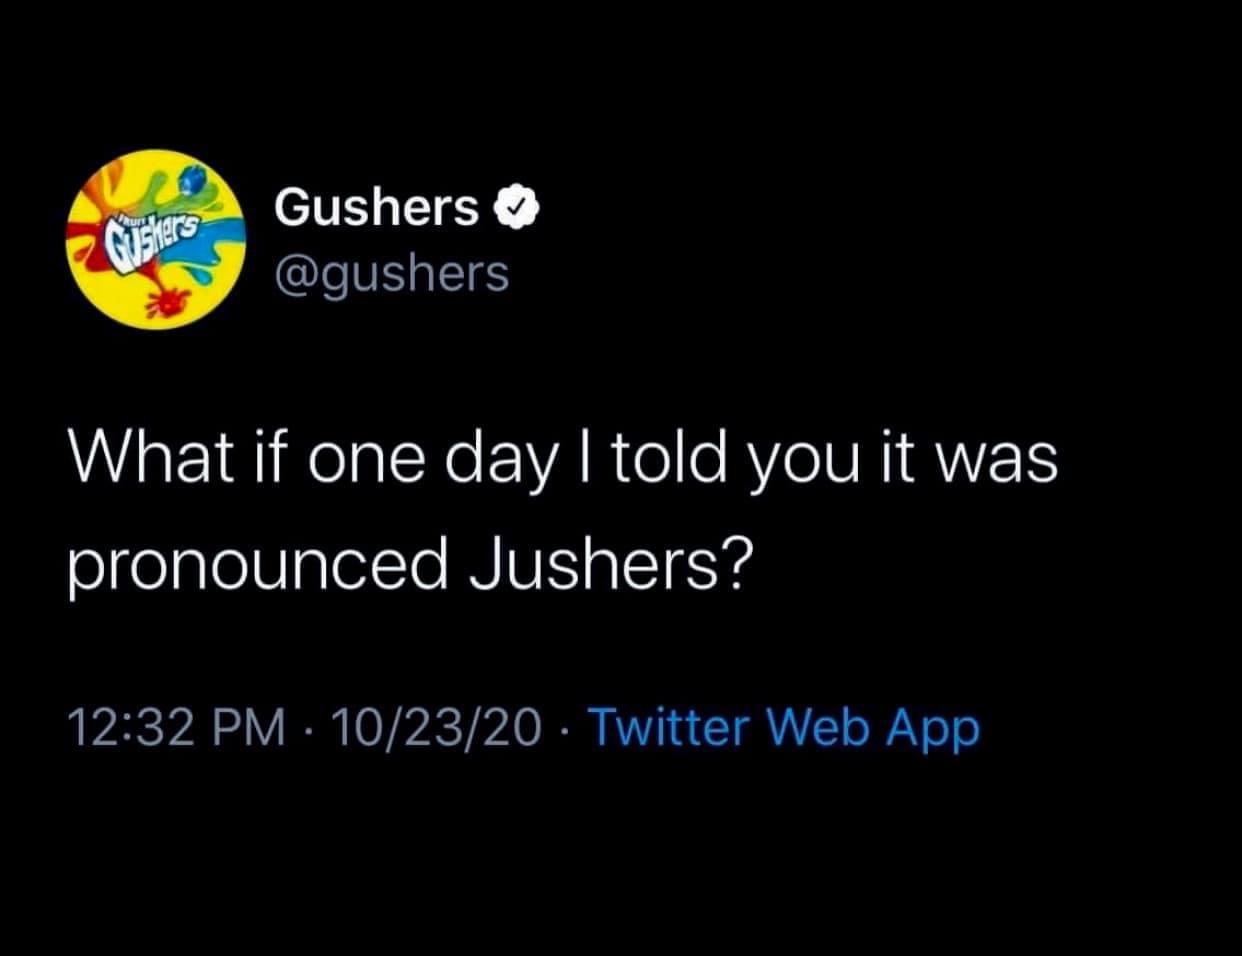 atmosphere - Gushers Gushers What if one day I told you it was pronounced Jushers? 102320 Twitter Web App